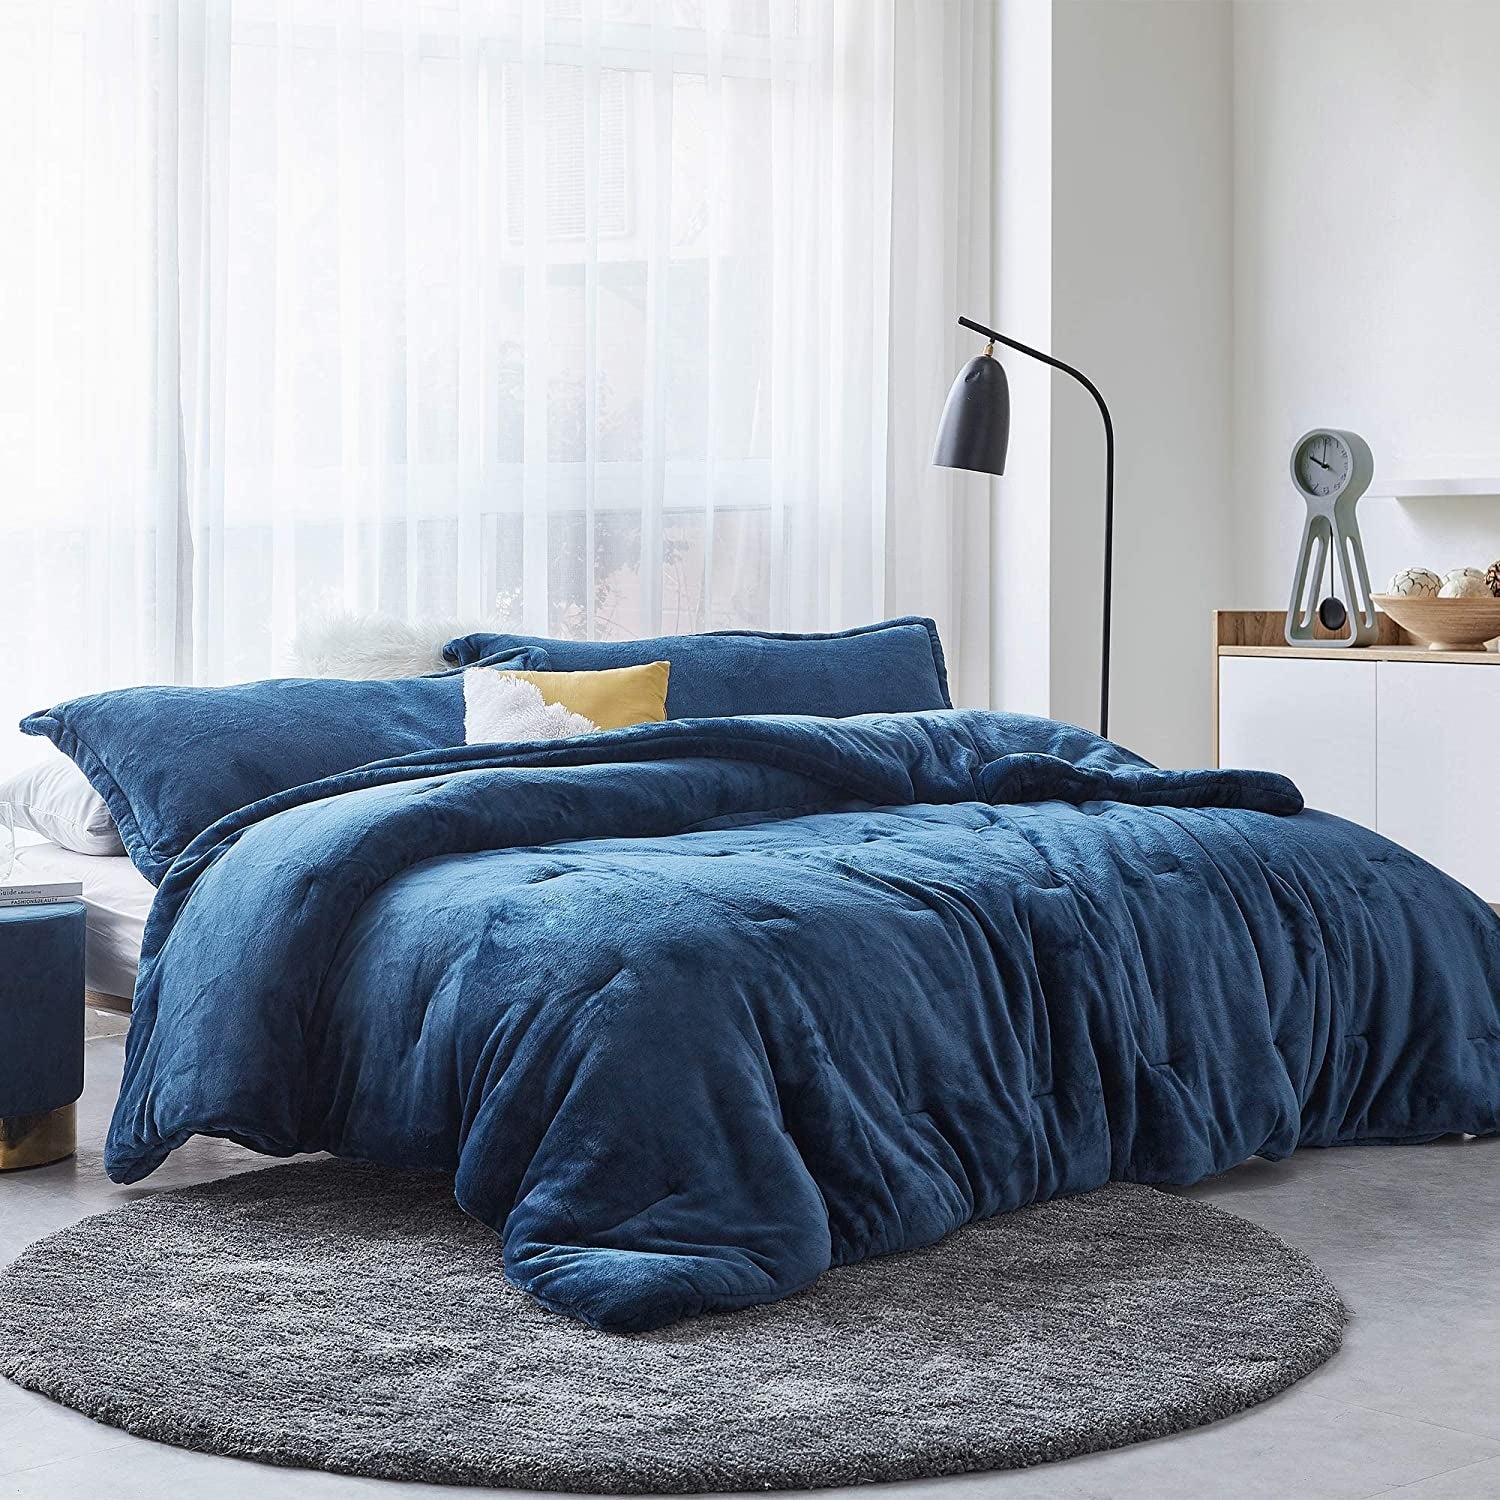 Byourbed Coma Inducer Nightfall Navy Oversized Comforter Set Queen ...